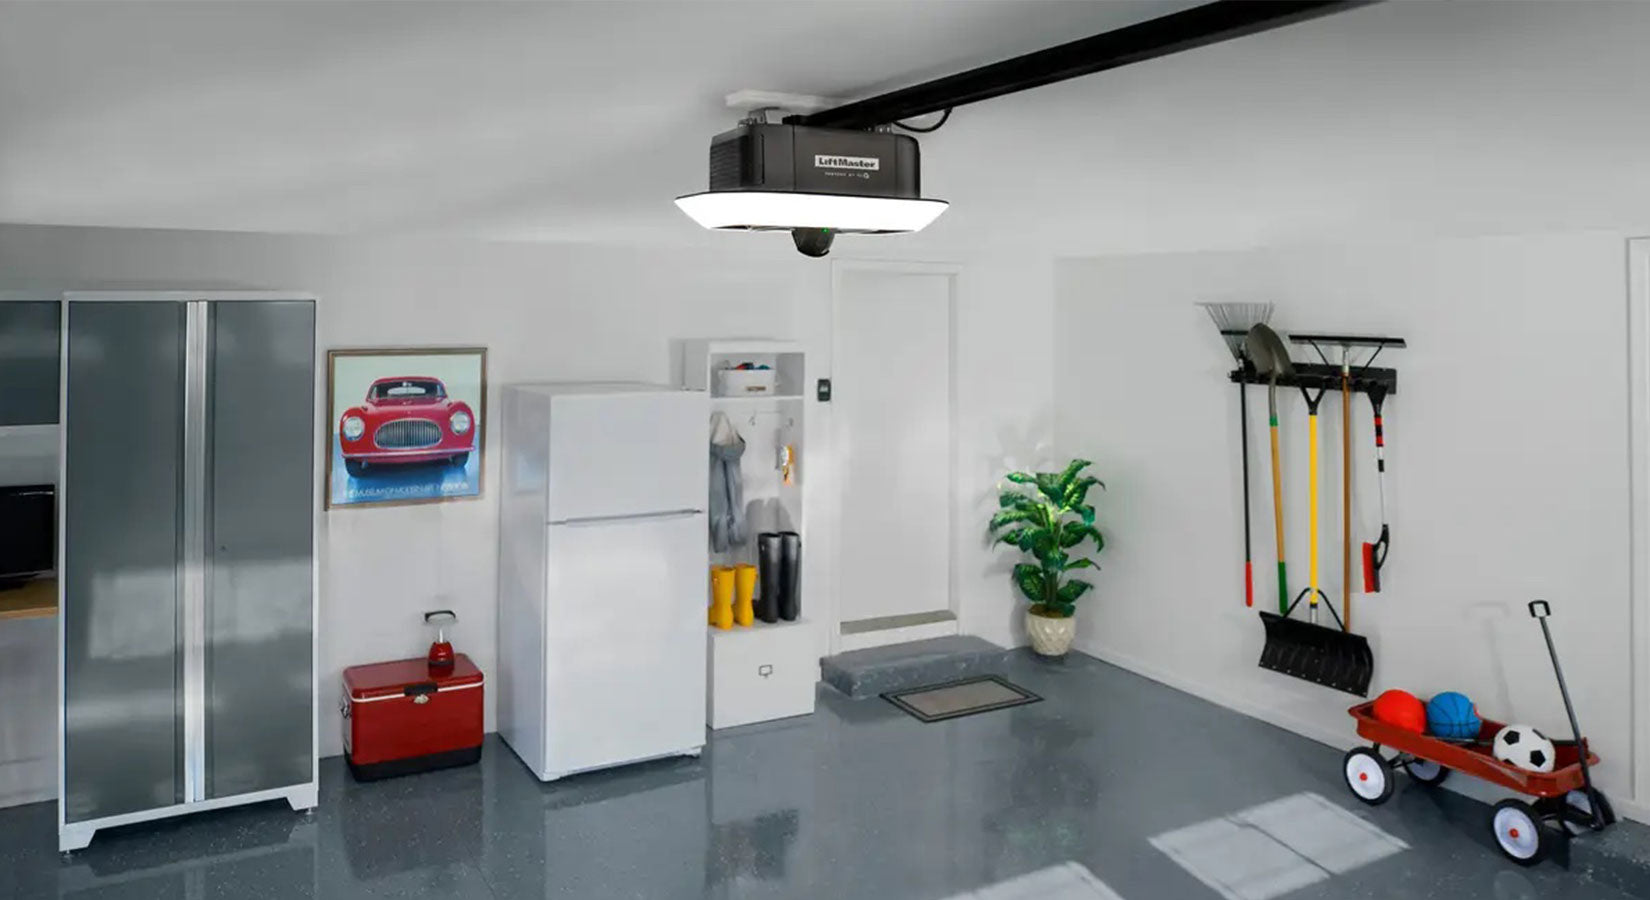 LiftMaster Introduces Its New Secure View Garage Door Opener | All Security Equipment